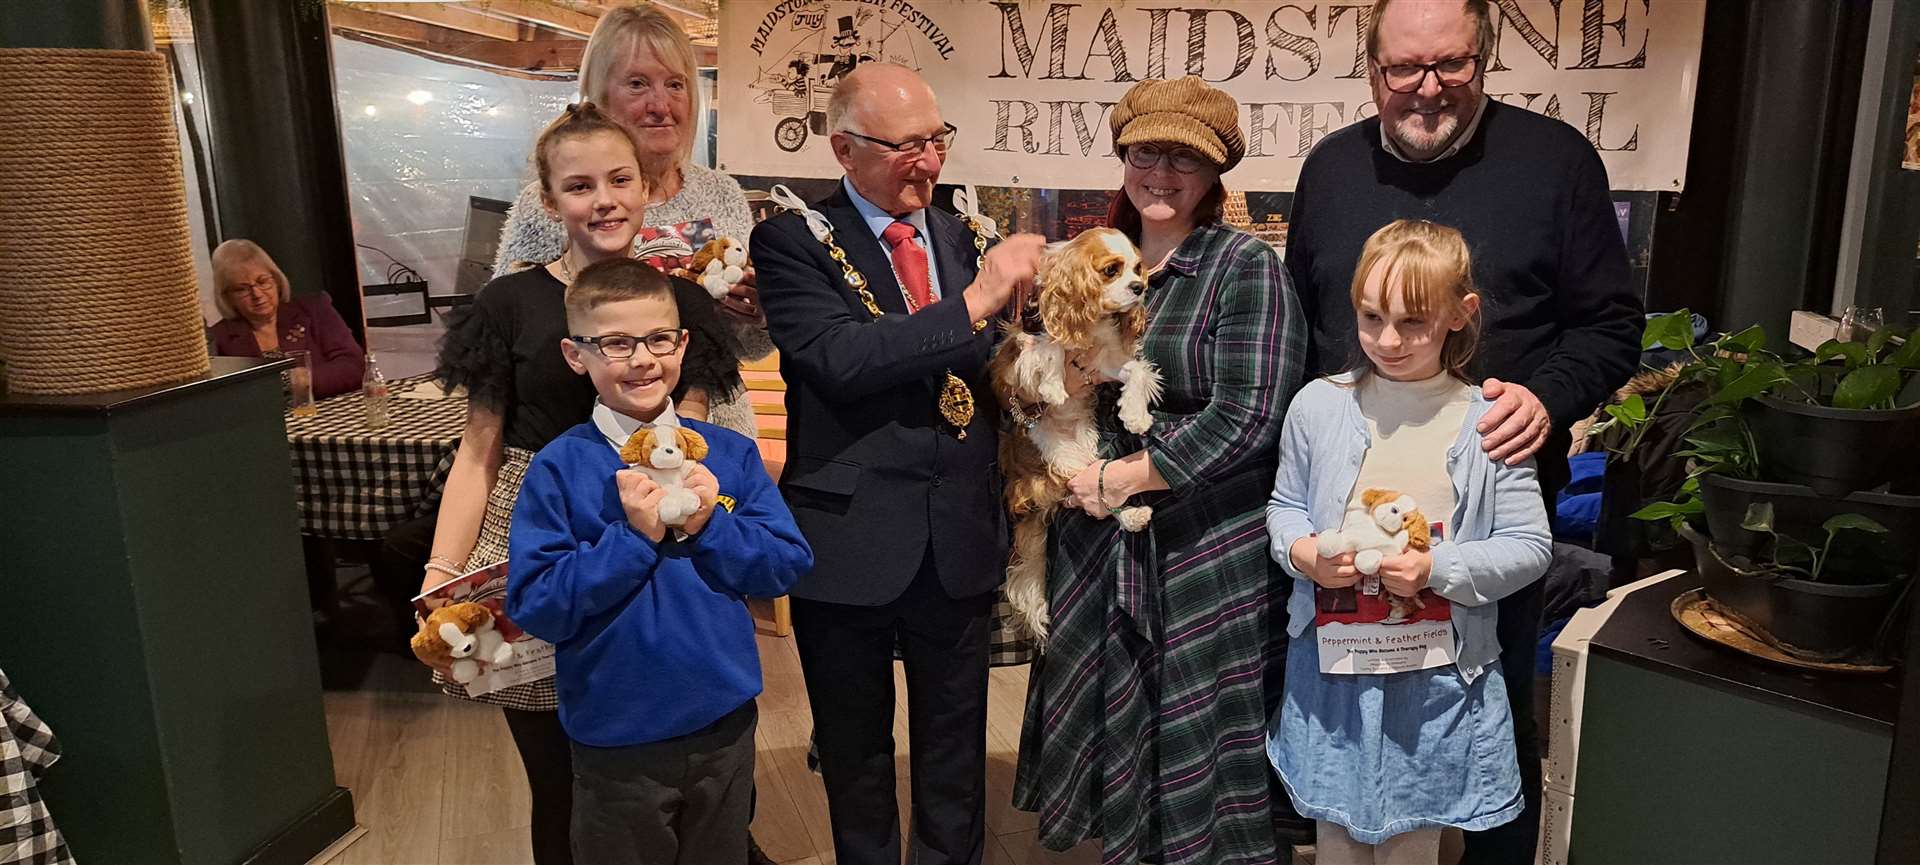 Winners of the children's competition to find hidden doggies at the festival, Kimberly, Jenson and Miley, pictured with the mayor and the organisers of the contest Clairey Suzanne and Marcus Niblett. Two other winners, Ava and Ellie, could not be present, but Ellie's mum is also pictured